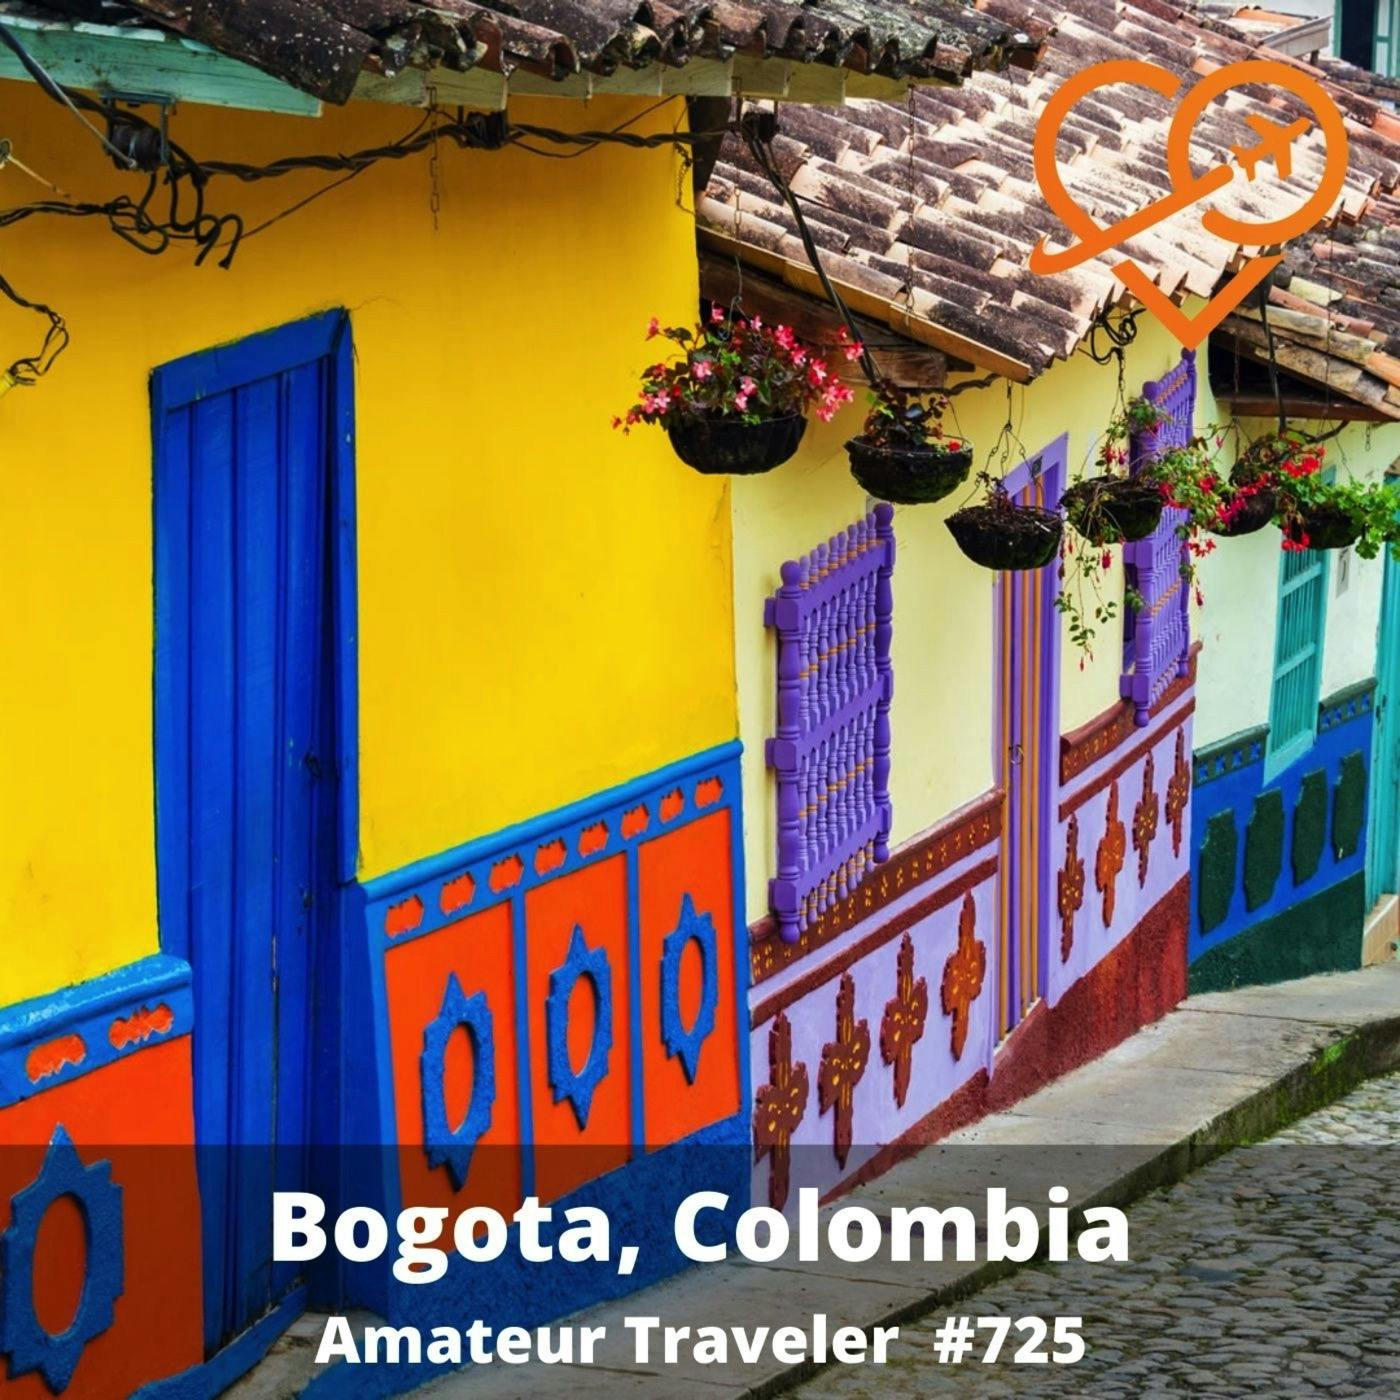 AT#725 - Travel to Bogota, Colombia